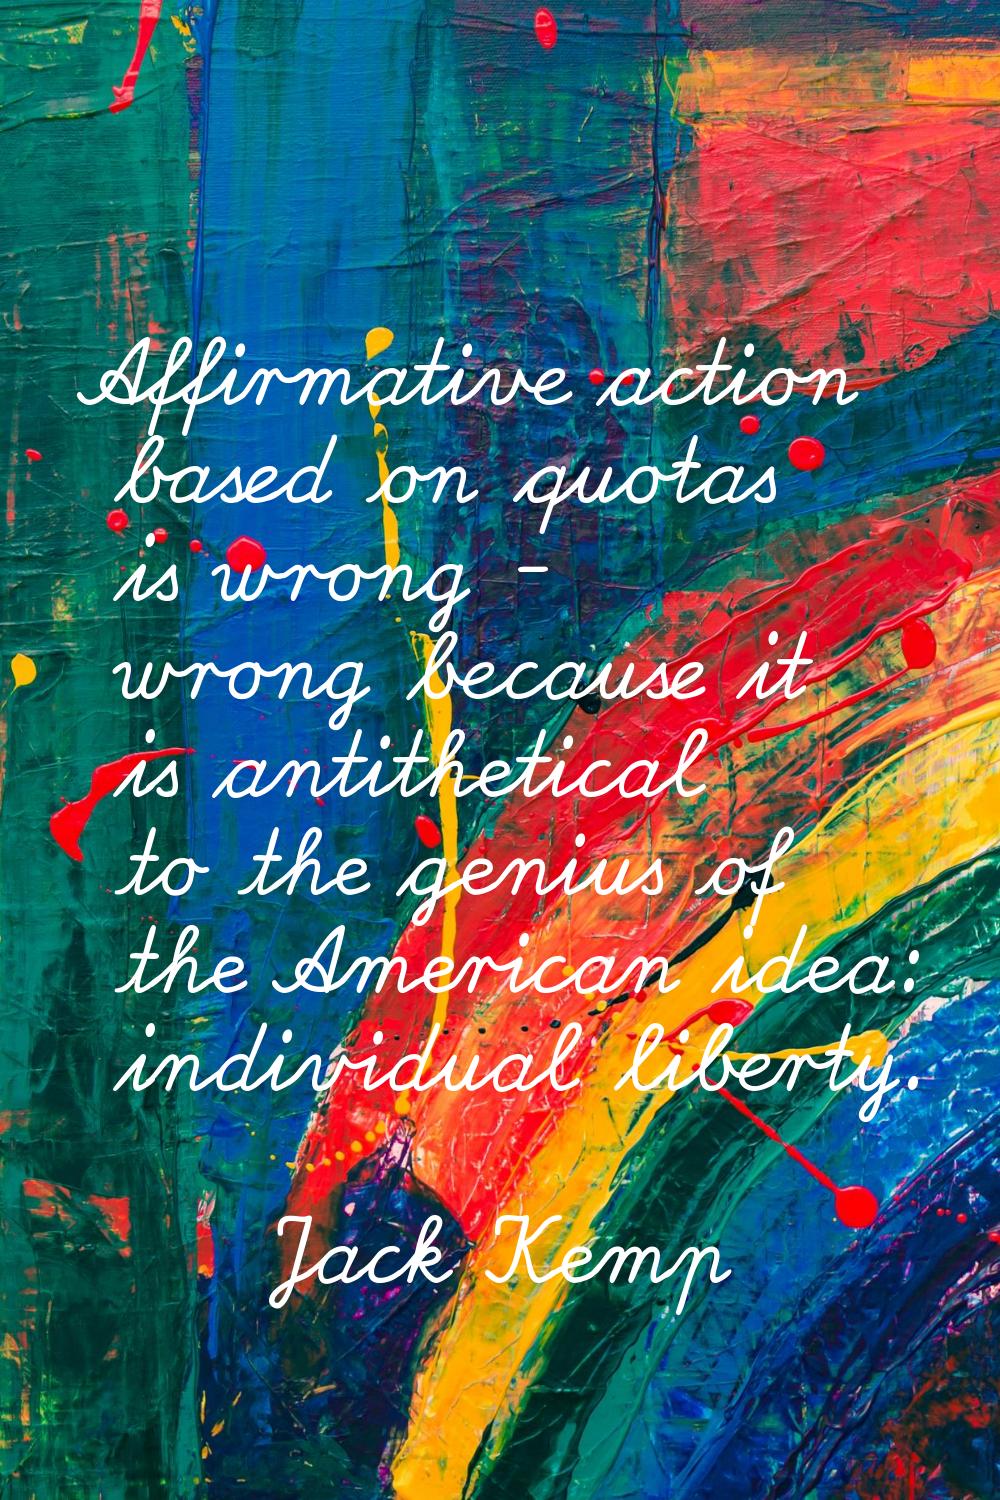 Affirmative action based on quotas is wrong - wrong because it is antithetical to the genius of the